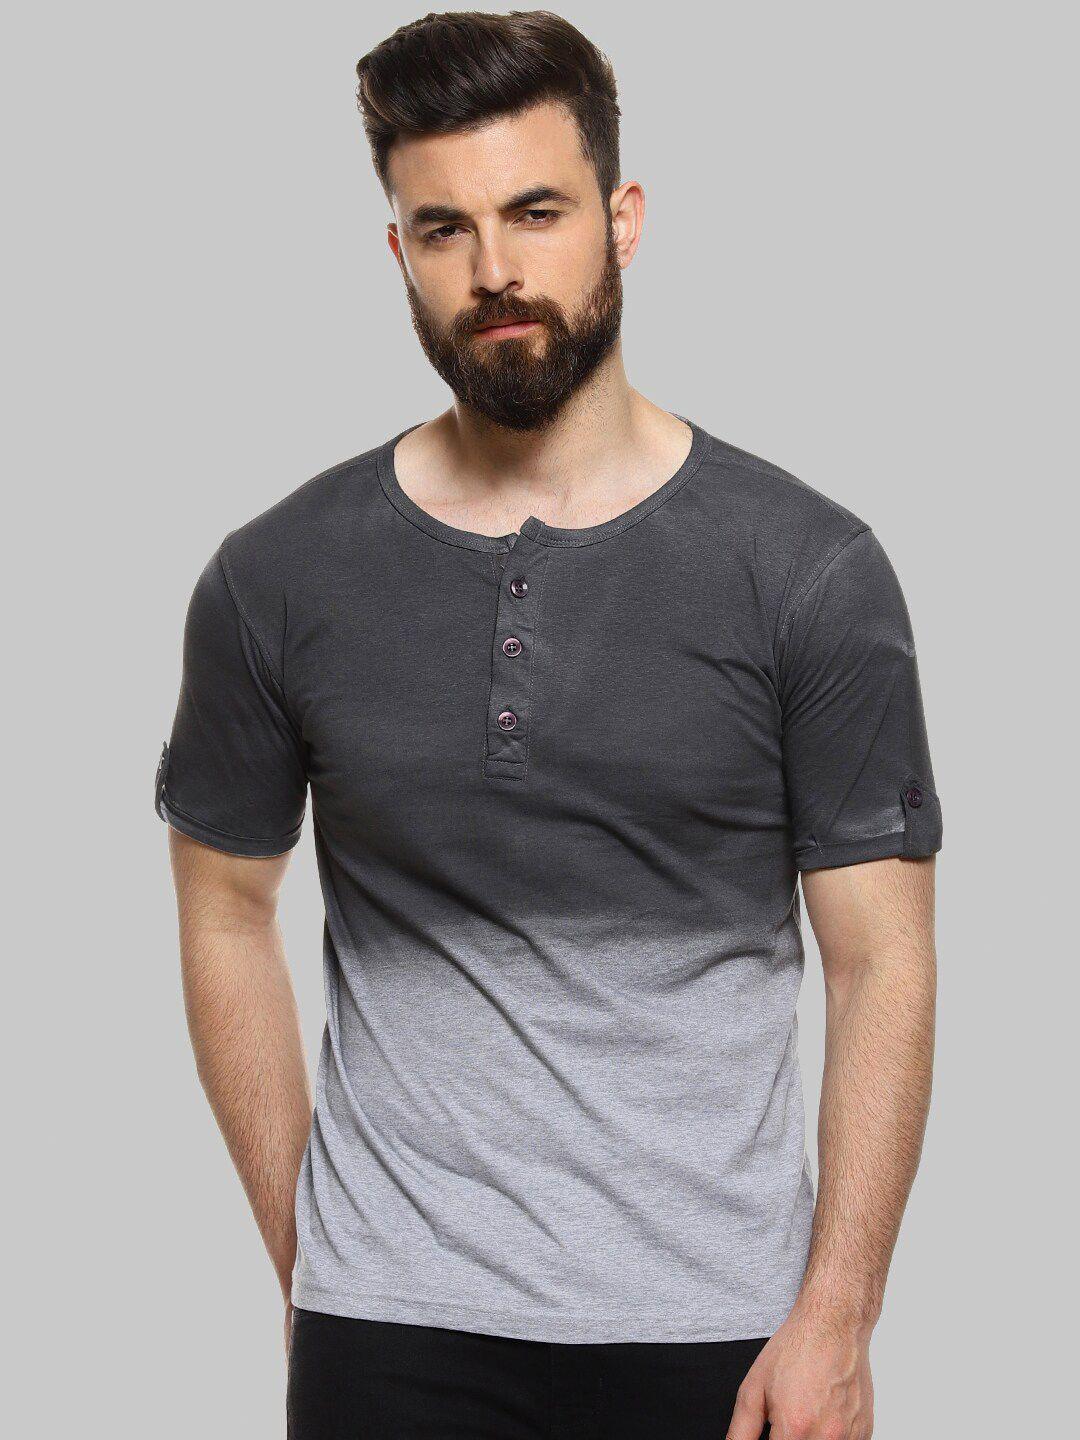 campus sutra charcoal henley neck short sleeves casual cotton t-shirt